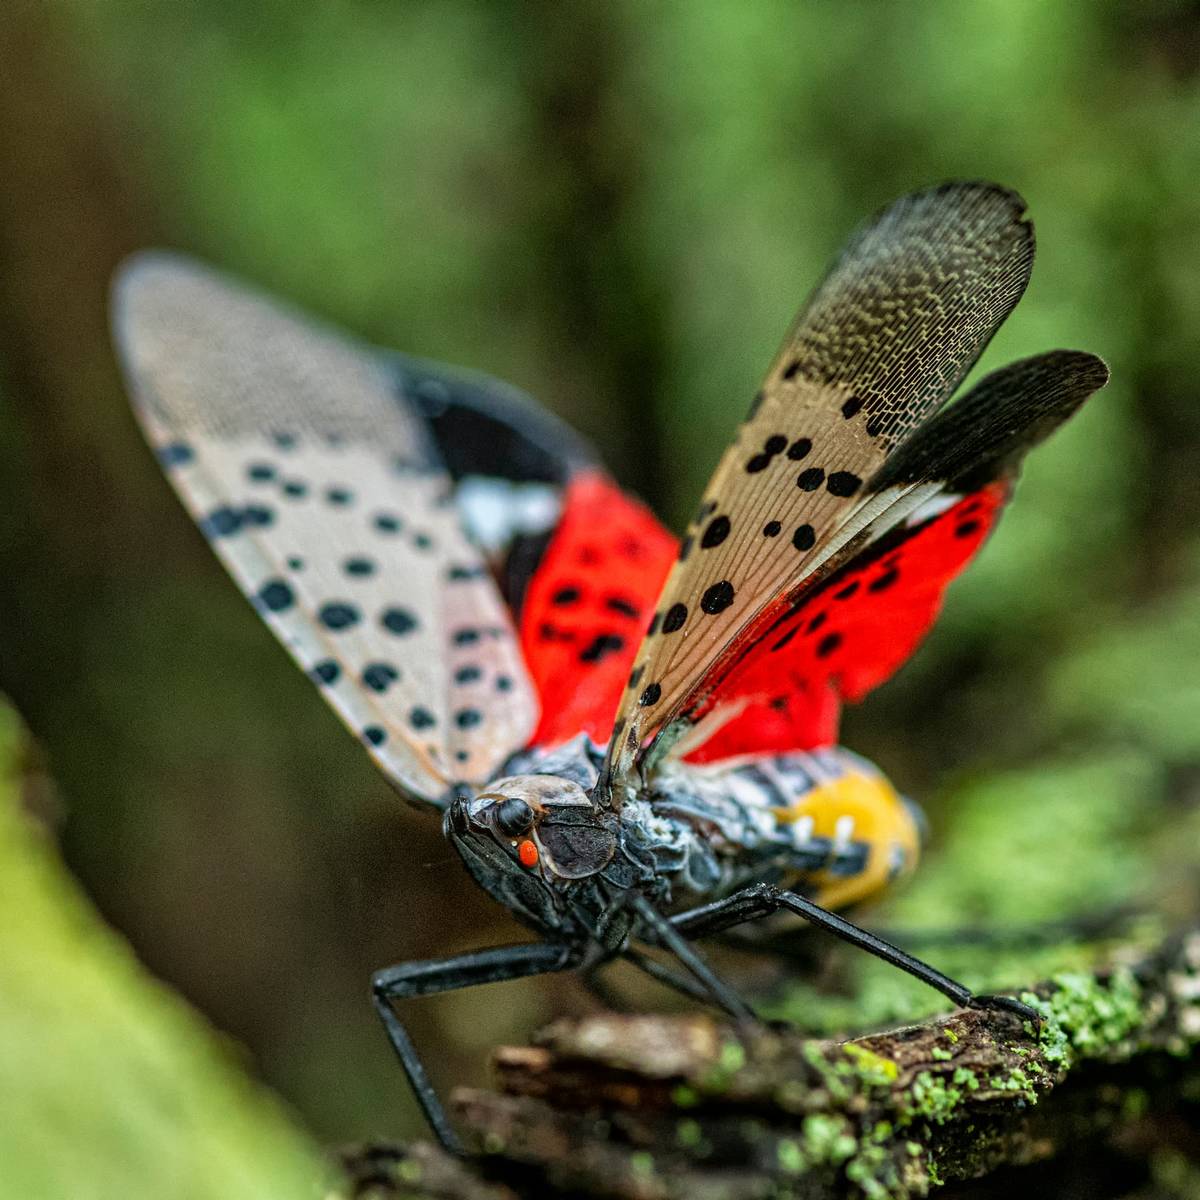 Spotted Lanternfly species